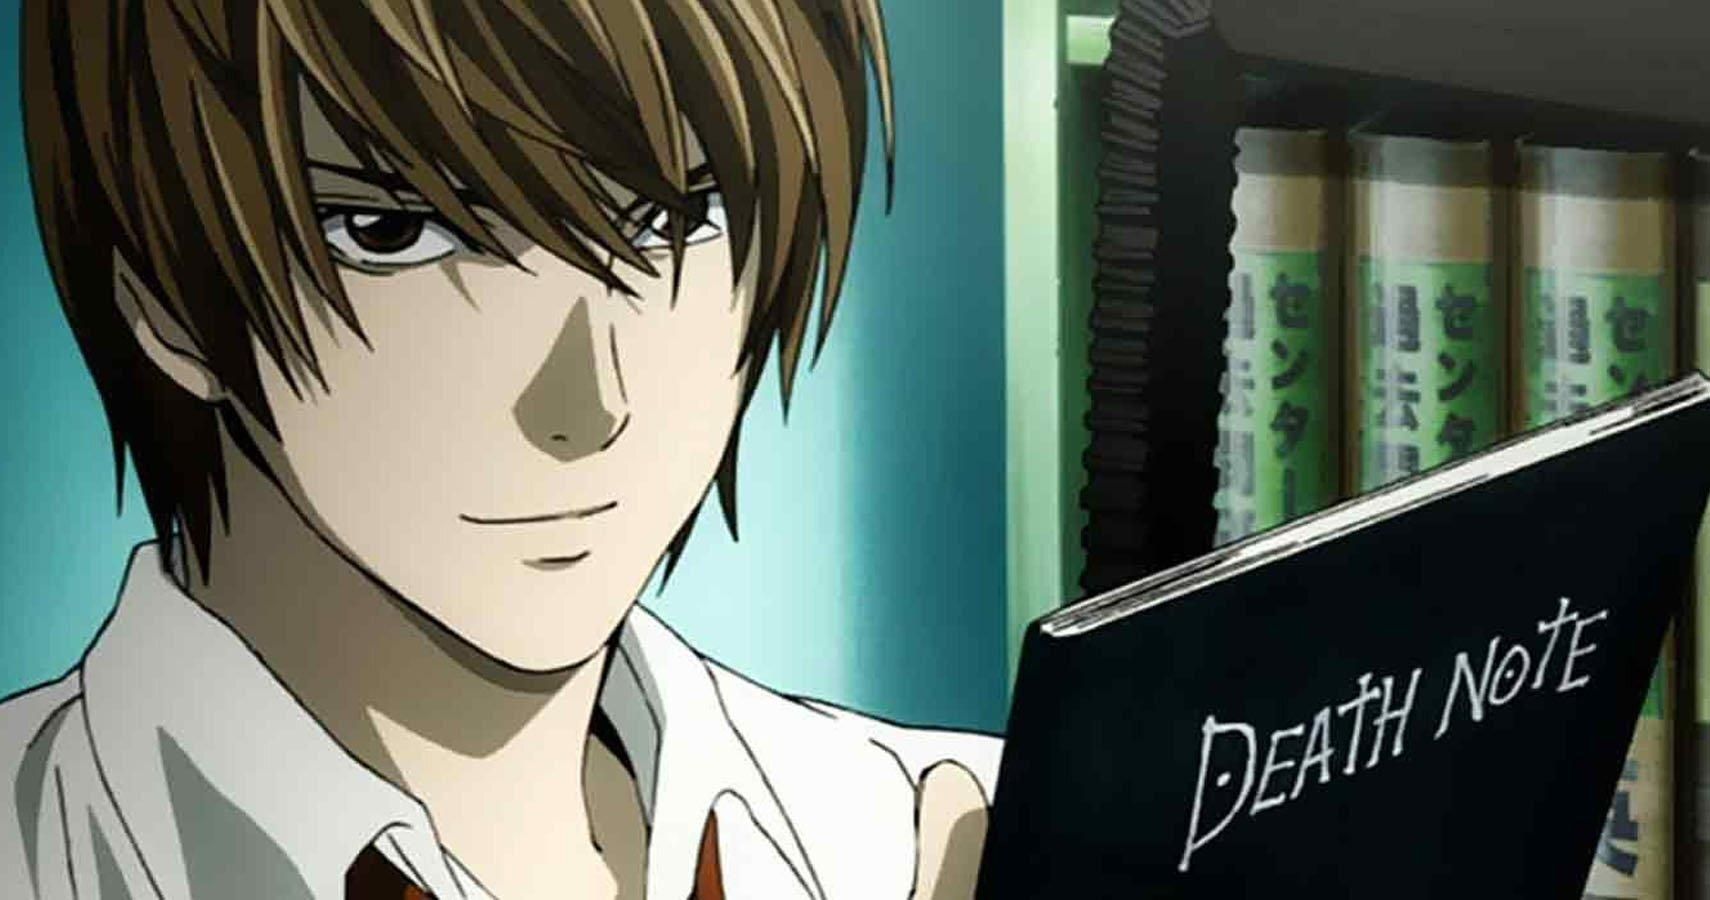 Light Yagami holding the death note.